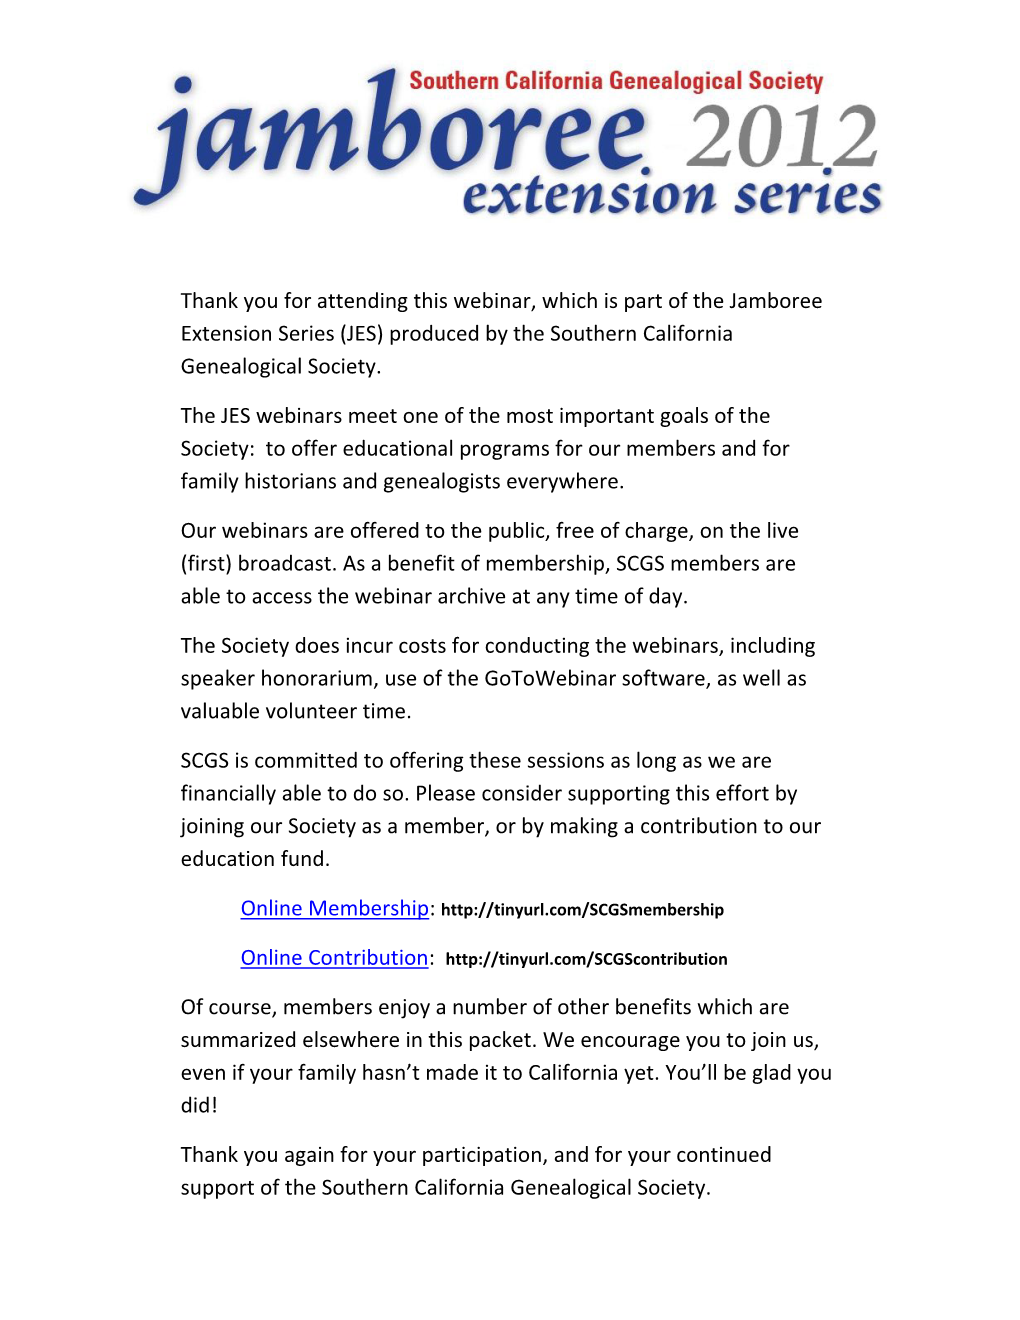 Thank You for Attending This Webinar, Which Is Part of the Jamboree Extension Series (JES) Produced by the Southern California Genealogical Society